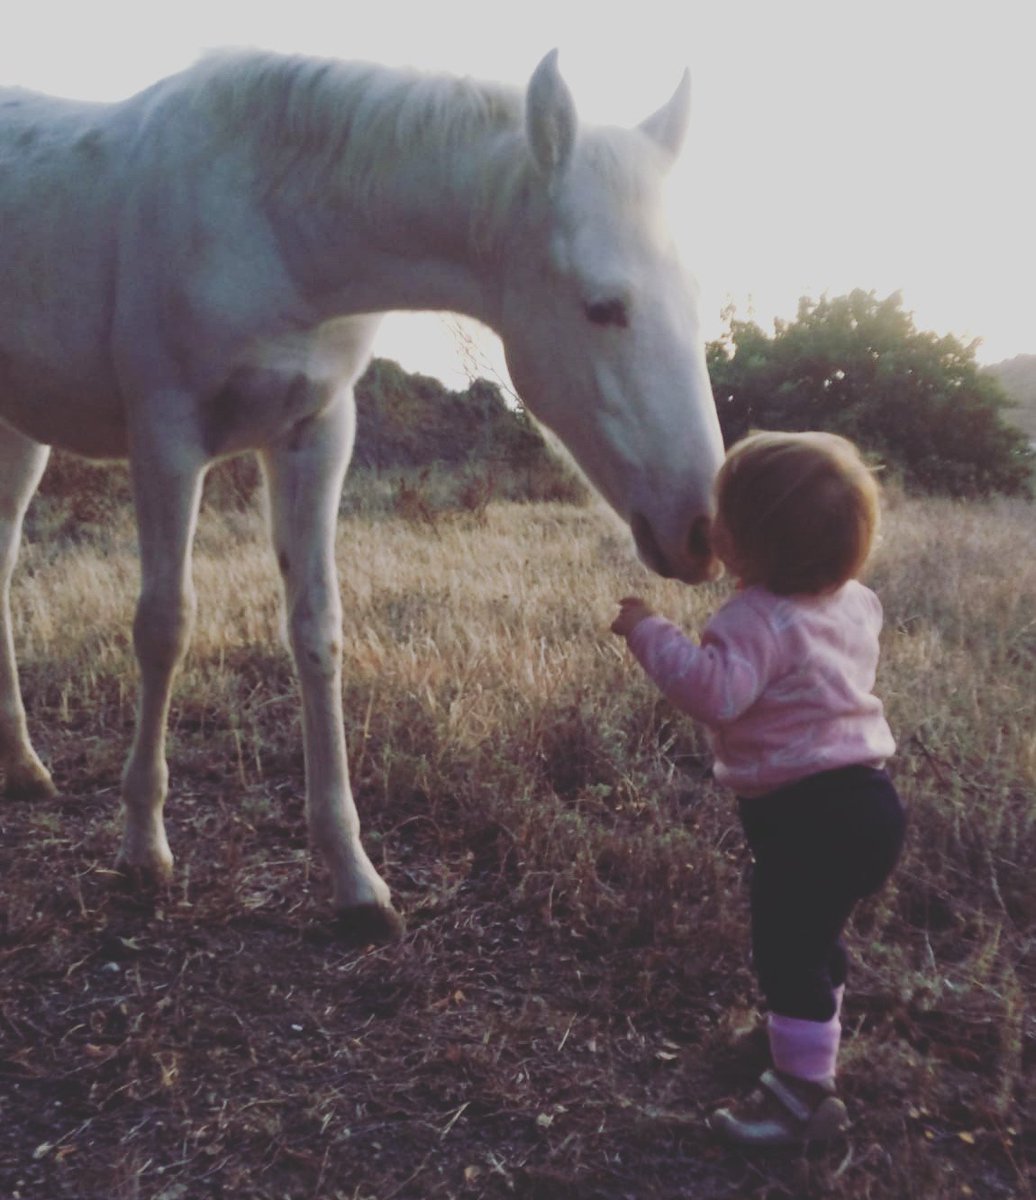 You're never too old to start learning, and you're never too young to aim high and achieve great things
🍀
🐴
🦄
#horse #horselover #horseaddict #horsepictures #horsepics #horsefriends #horseoftheday #nature #childhood #motivational #inspiration  #tophorsetweets #picoftheday